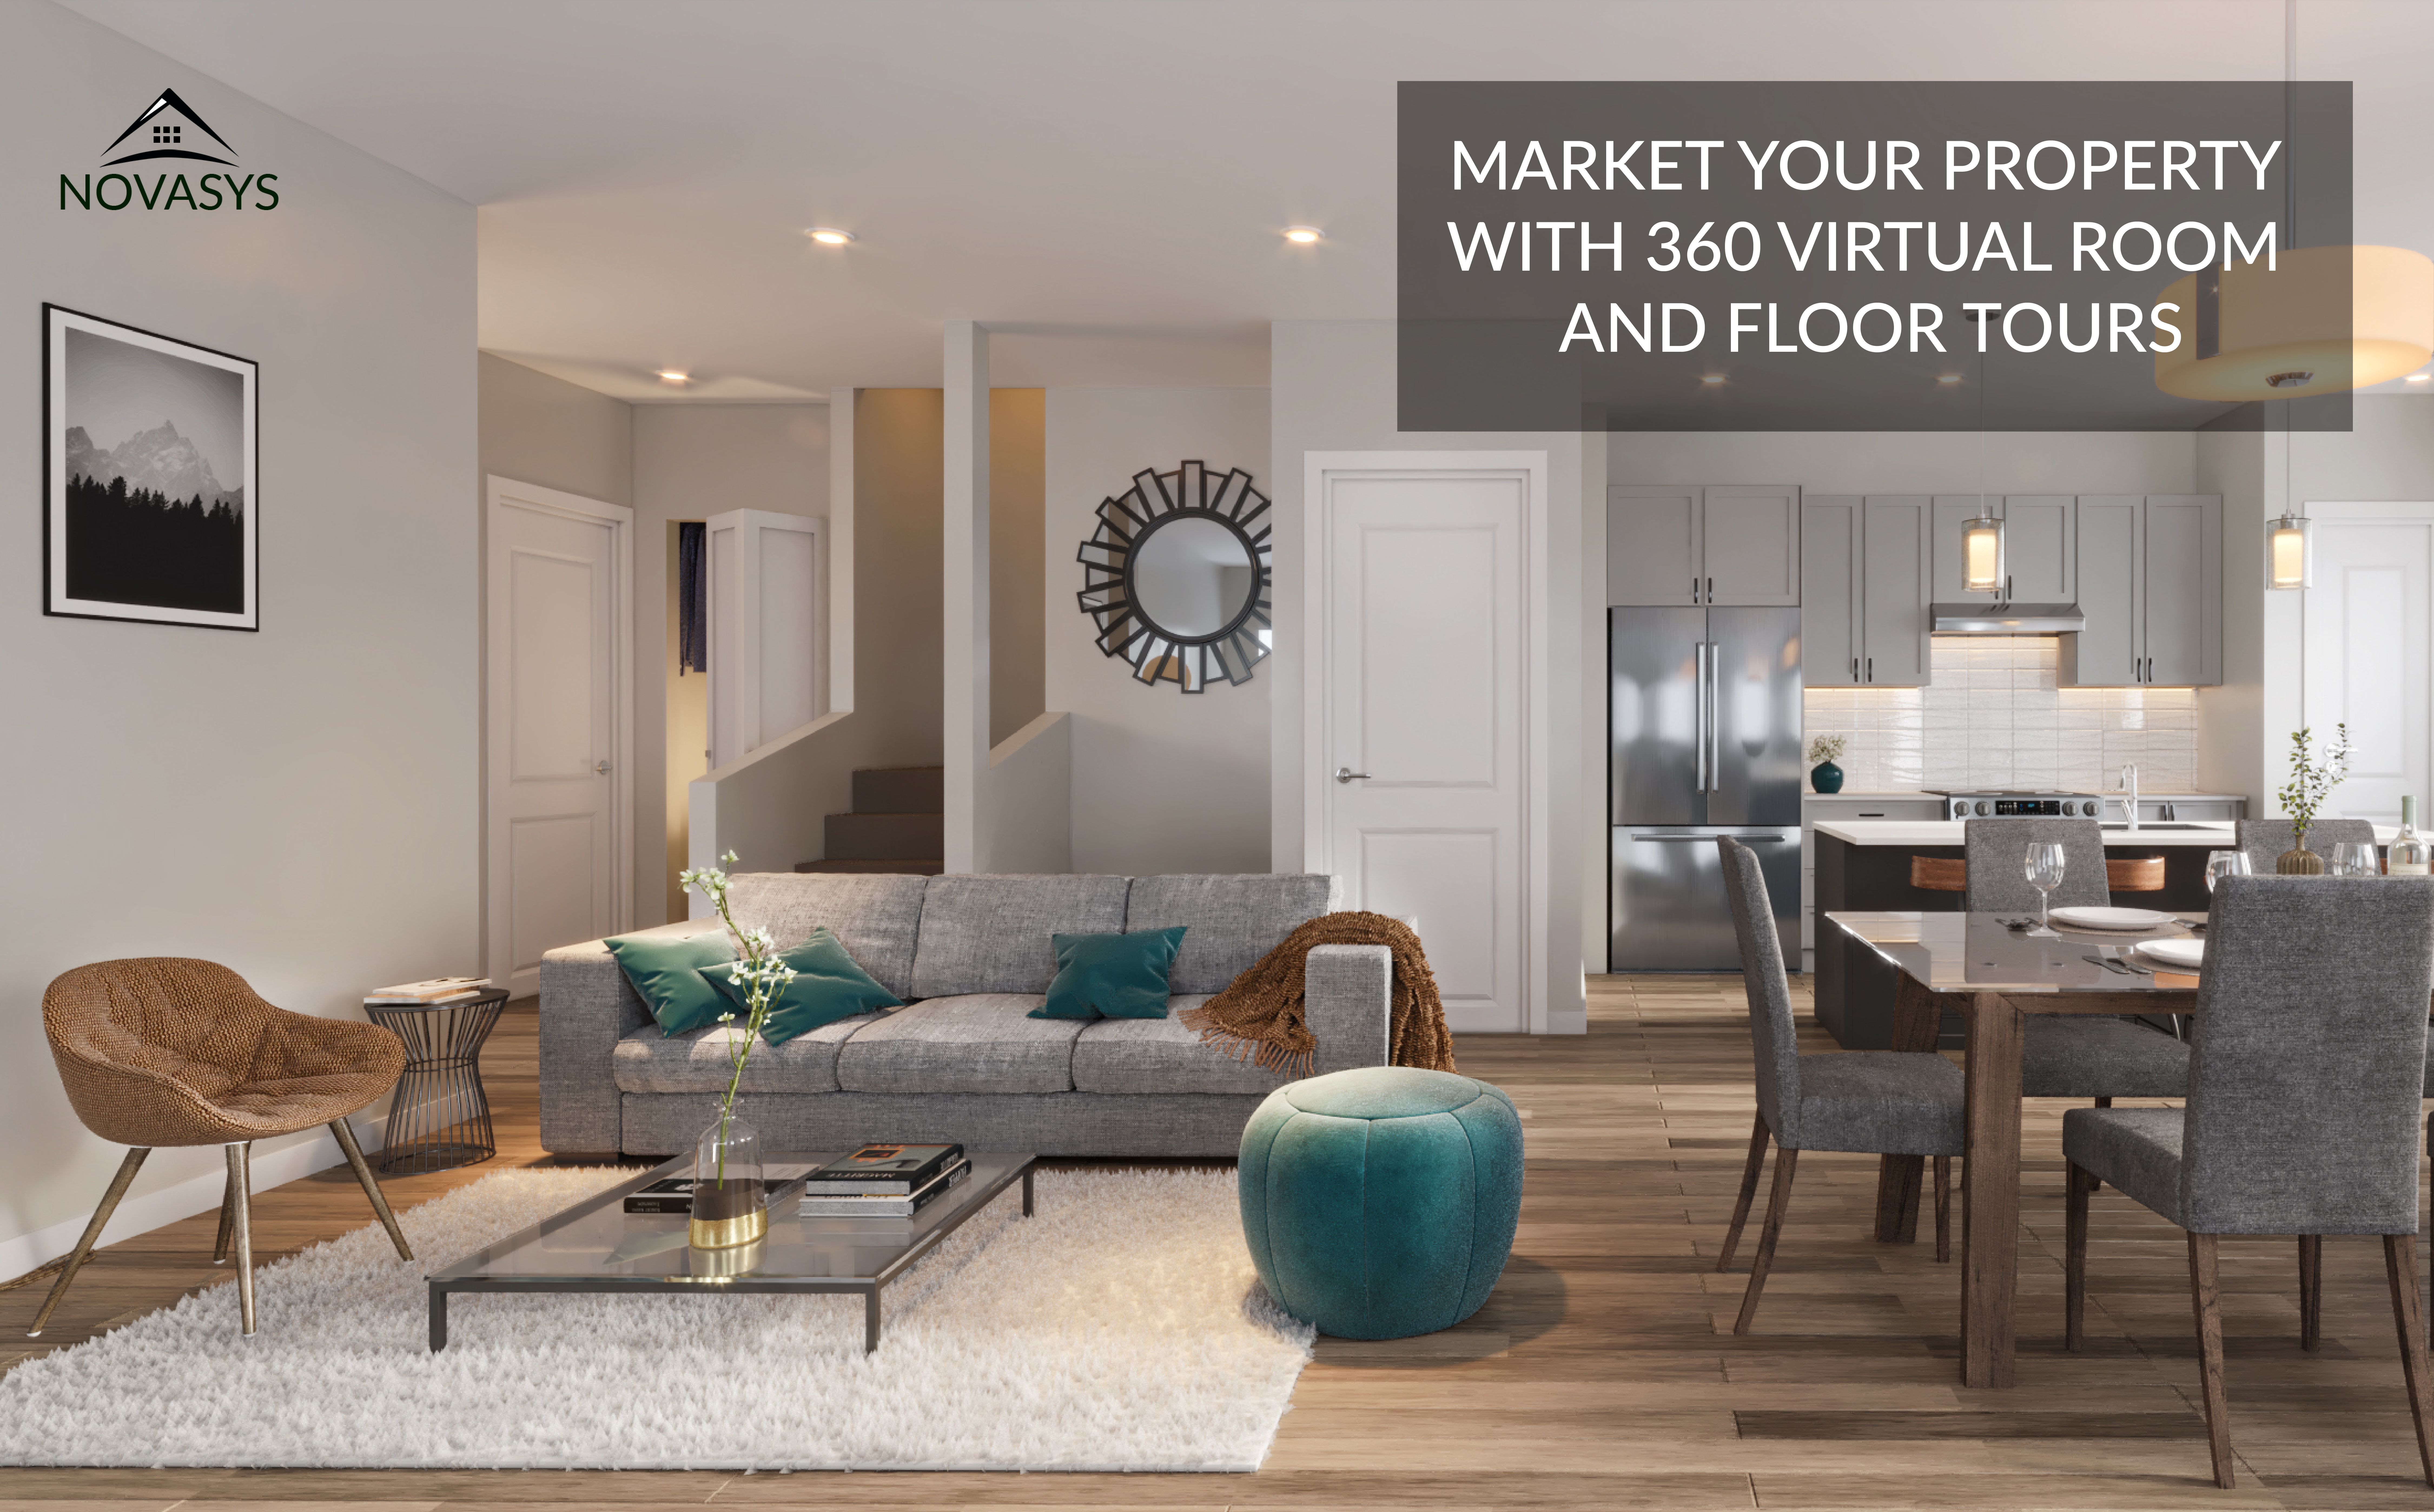 Get a Head Start on Marketing Your Property with Virtual Room and Floor Tours